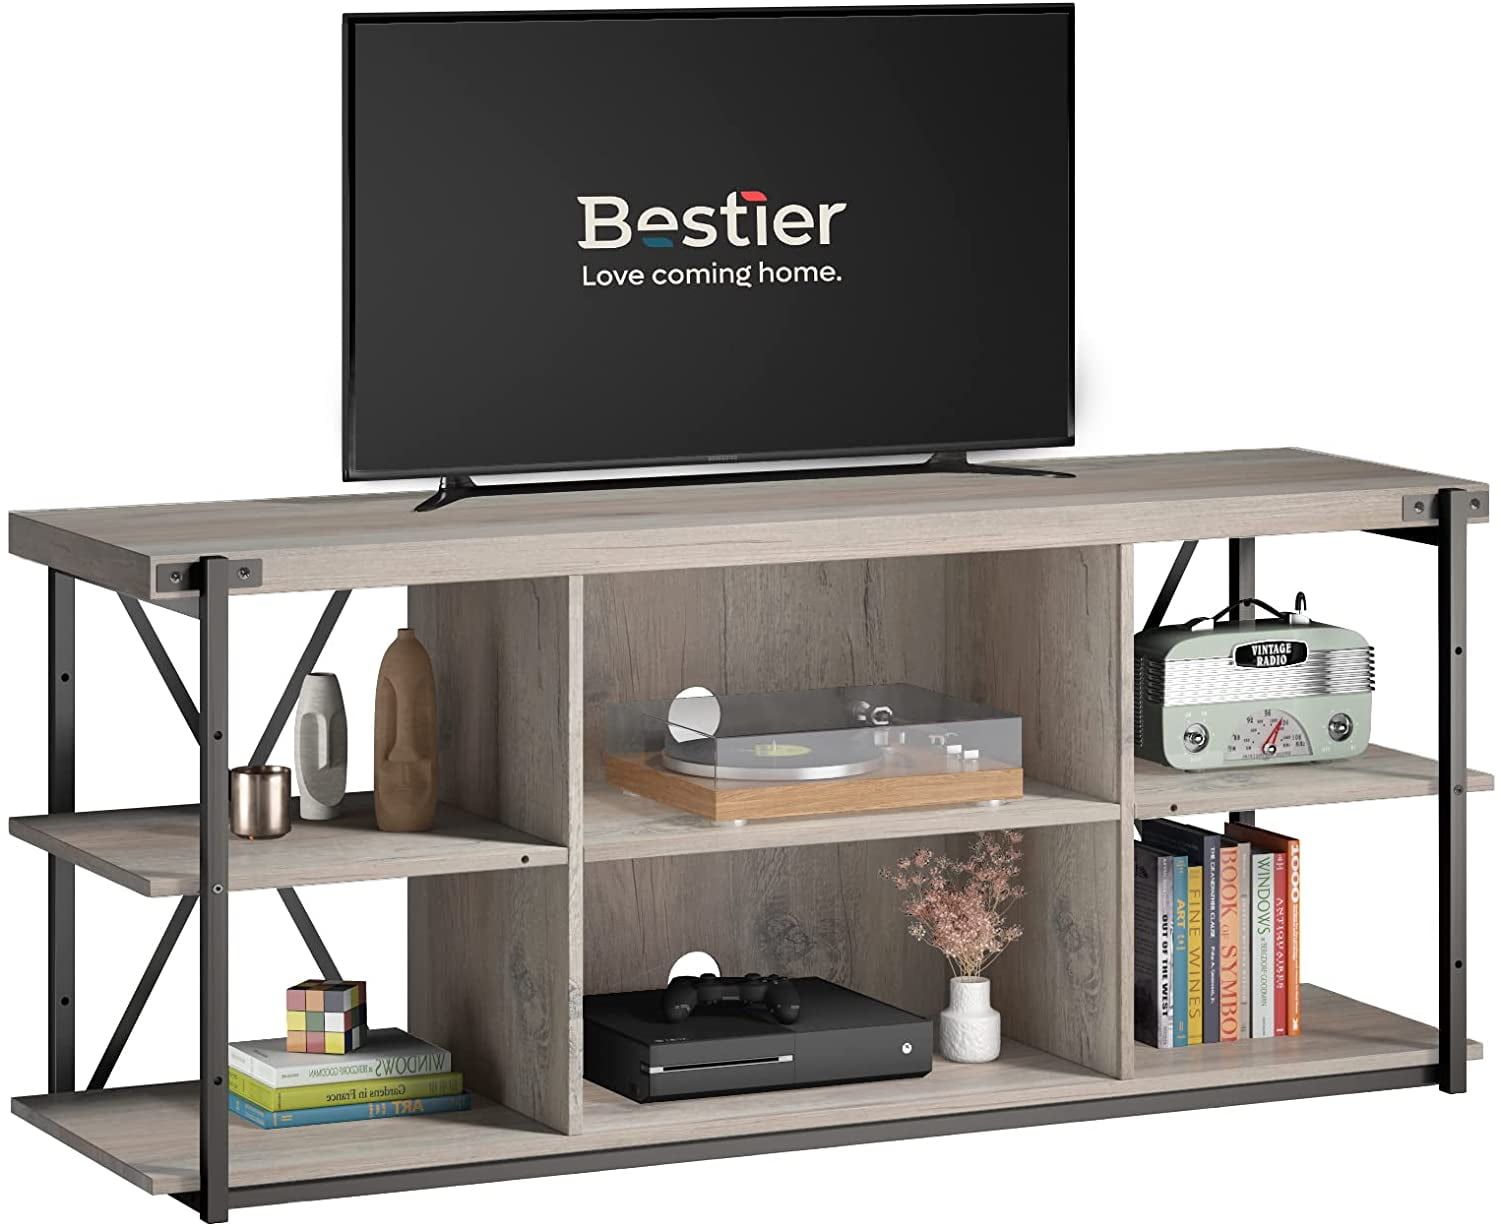 Bestier Farmhouse Tv Stand With Storage Shelves For Tvs Up To 65", Wash Intended For Farmhouse Stands With Shelves (View 4 of 20)